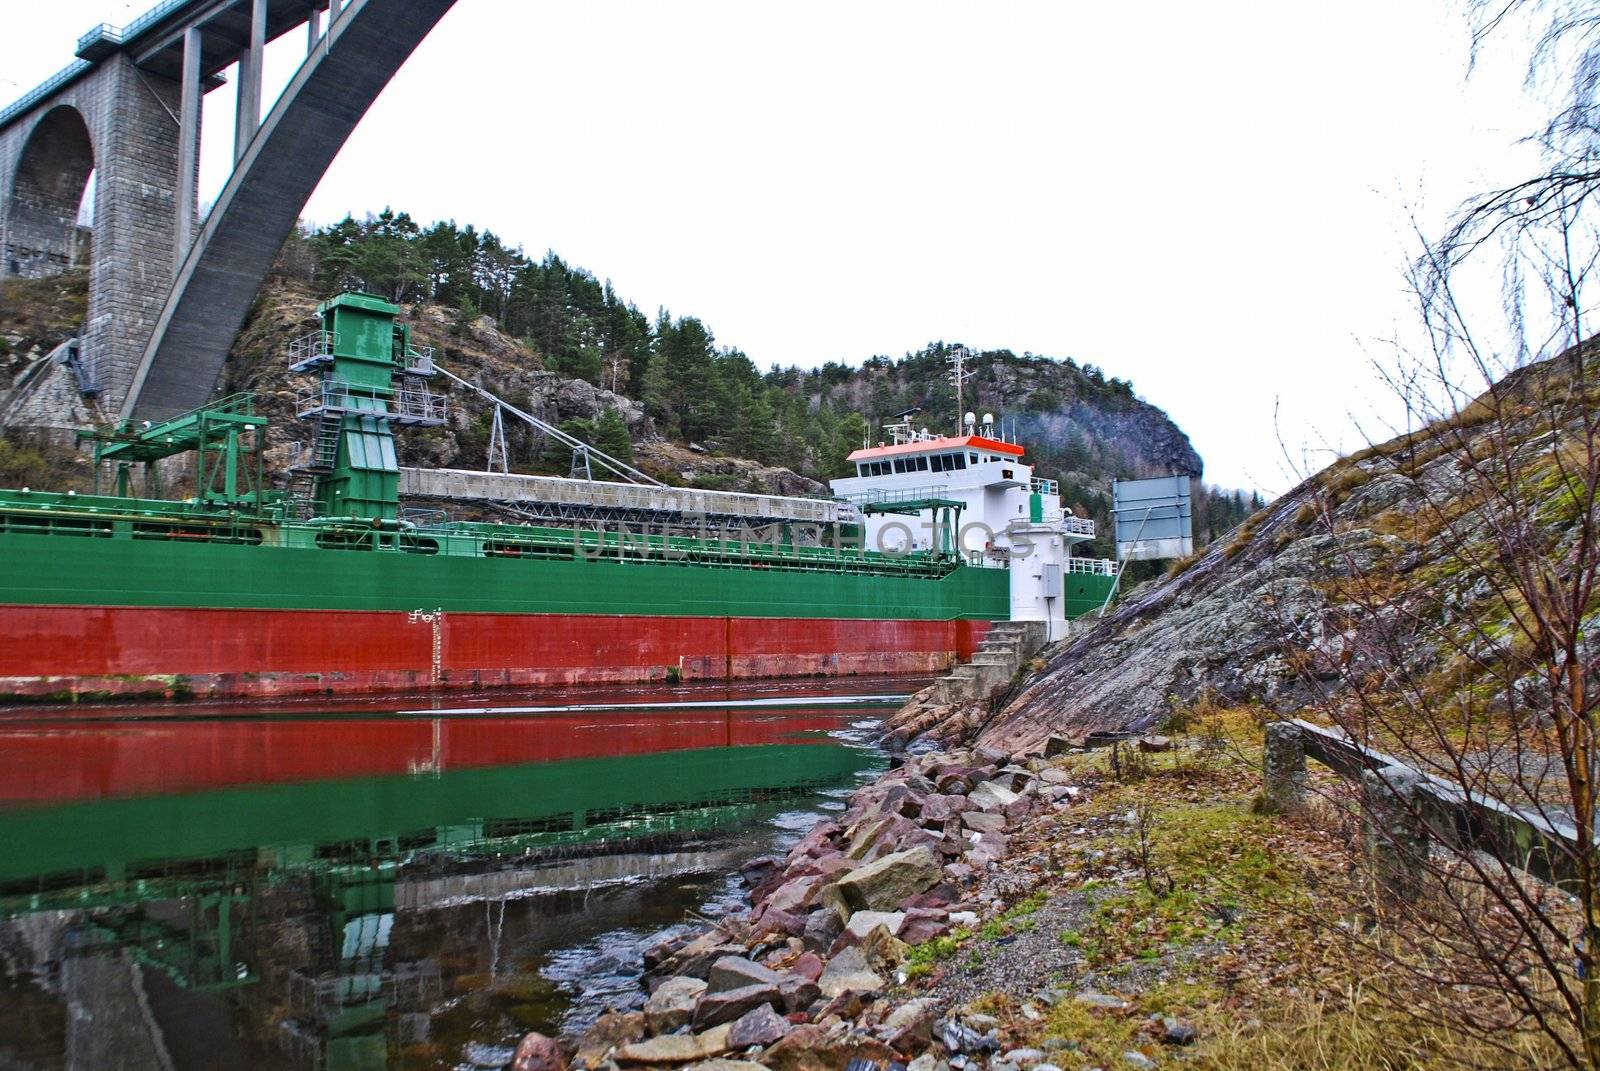 cargo ship in ringdalsfjord, image 2 by steirus